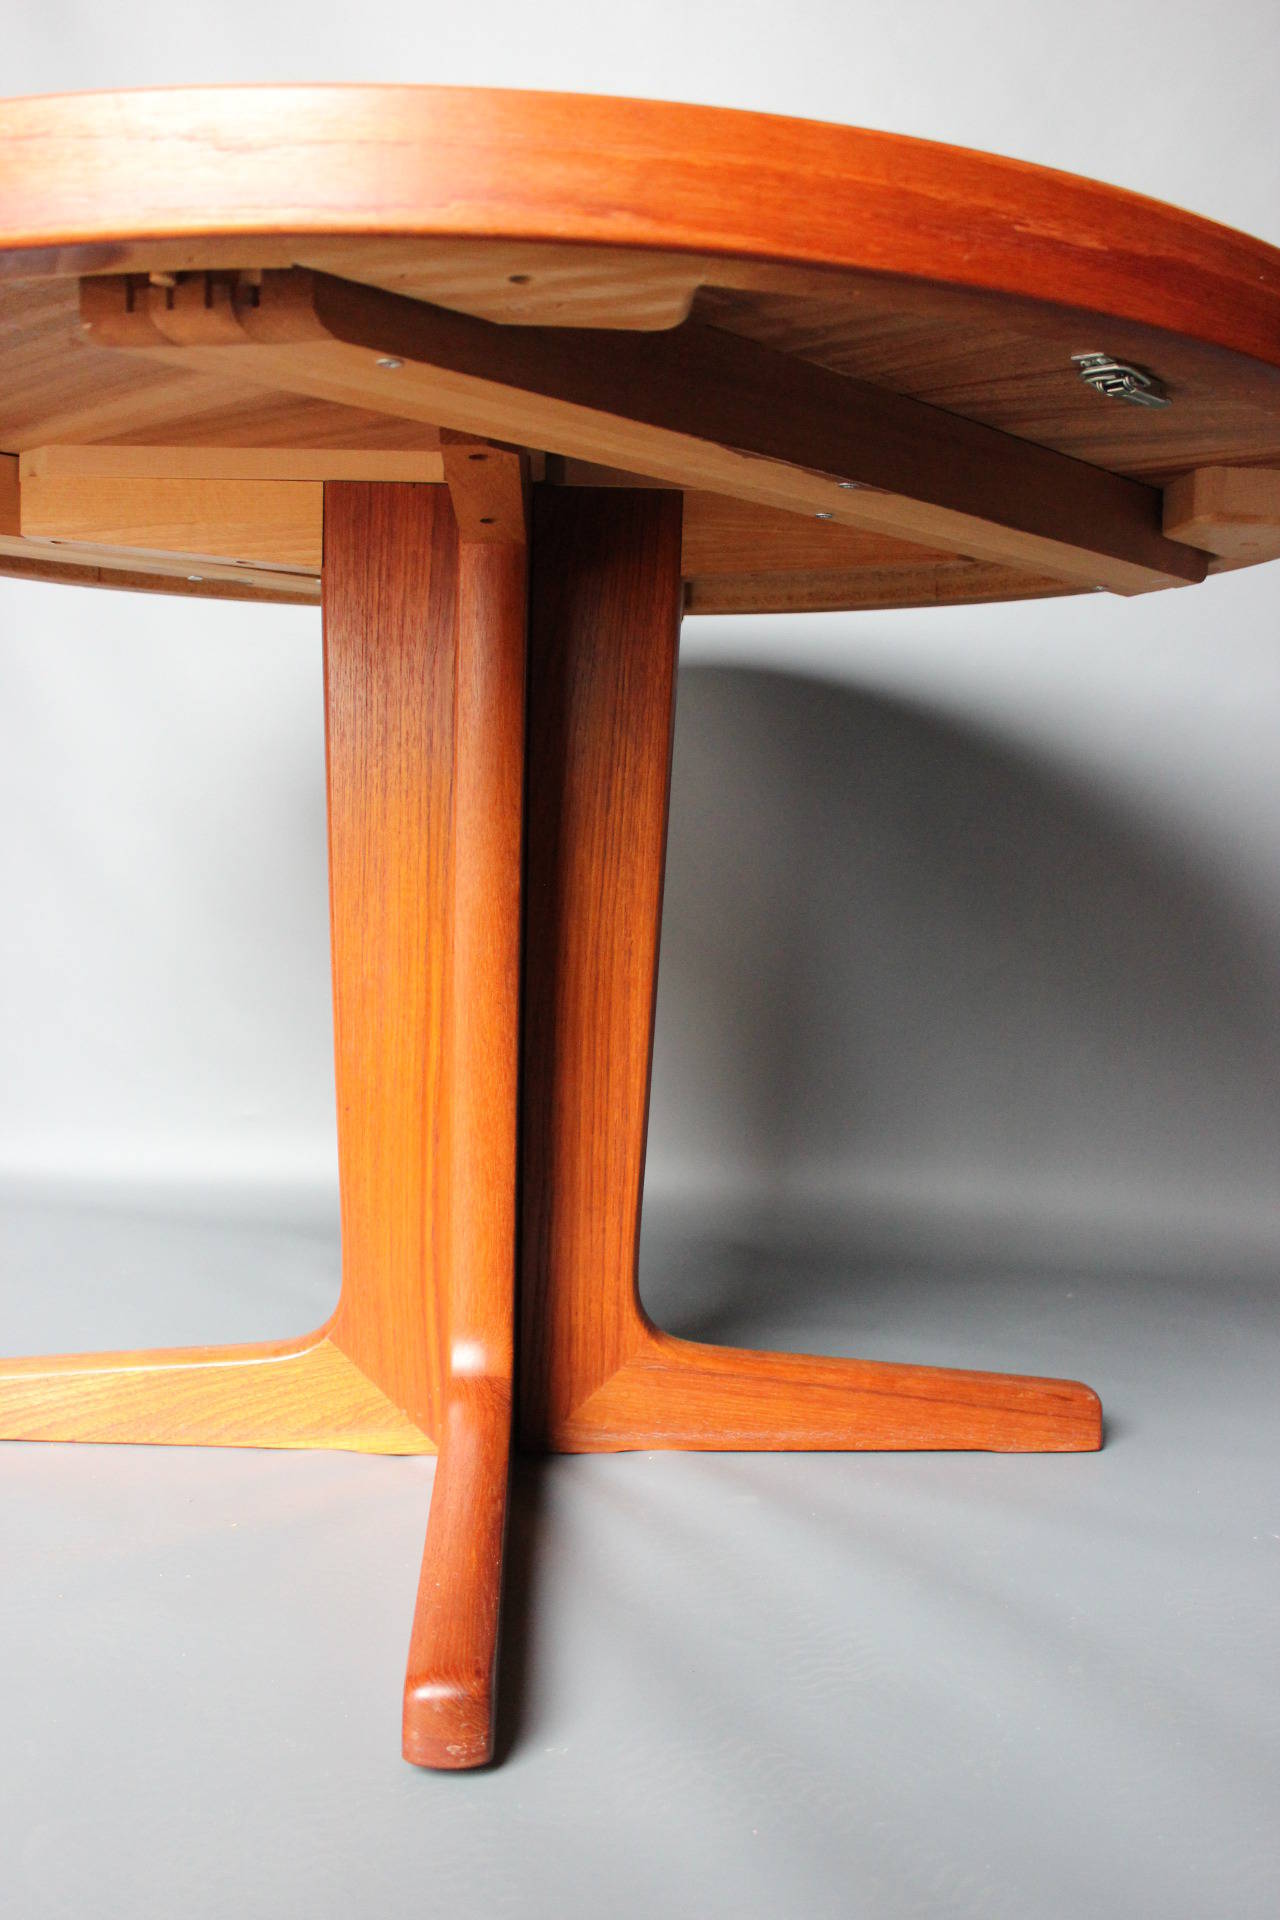 Scandinavian Modern Dining Table in Teakwood of Danish Designer and Manufactured by Gudme, 1960s For Sale